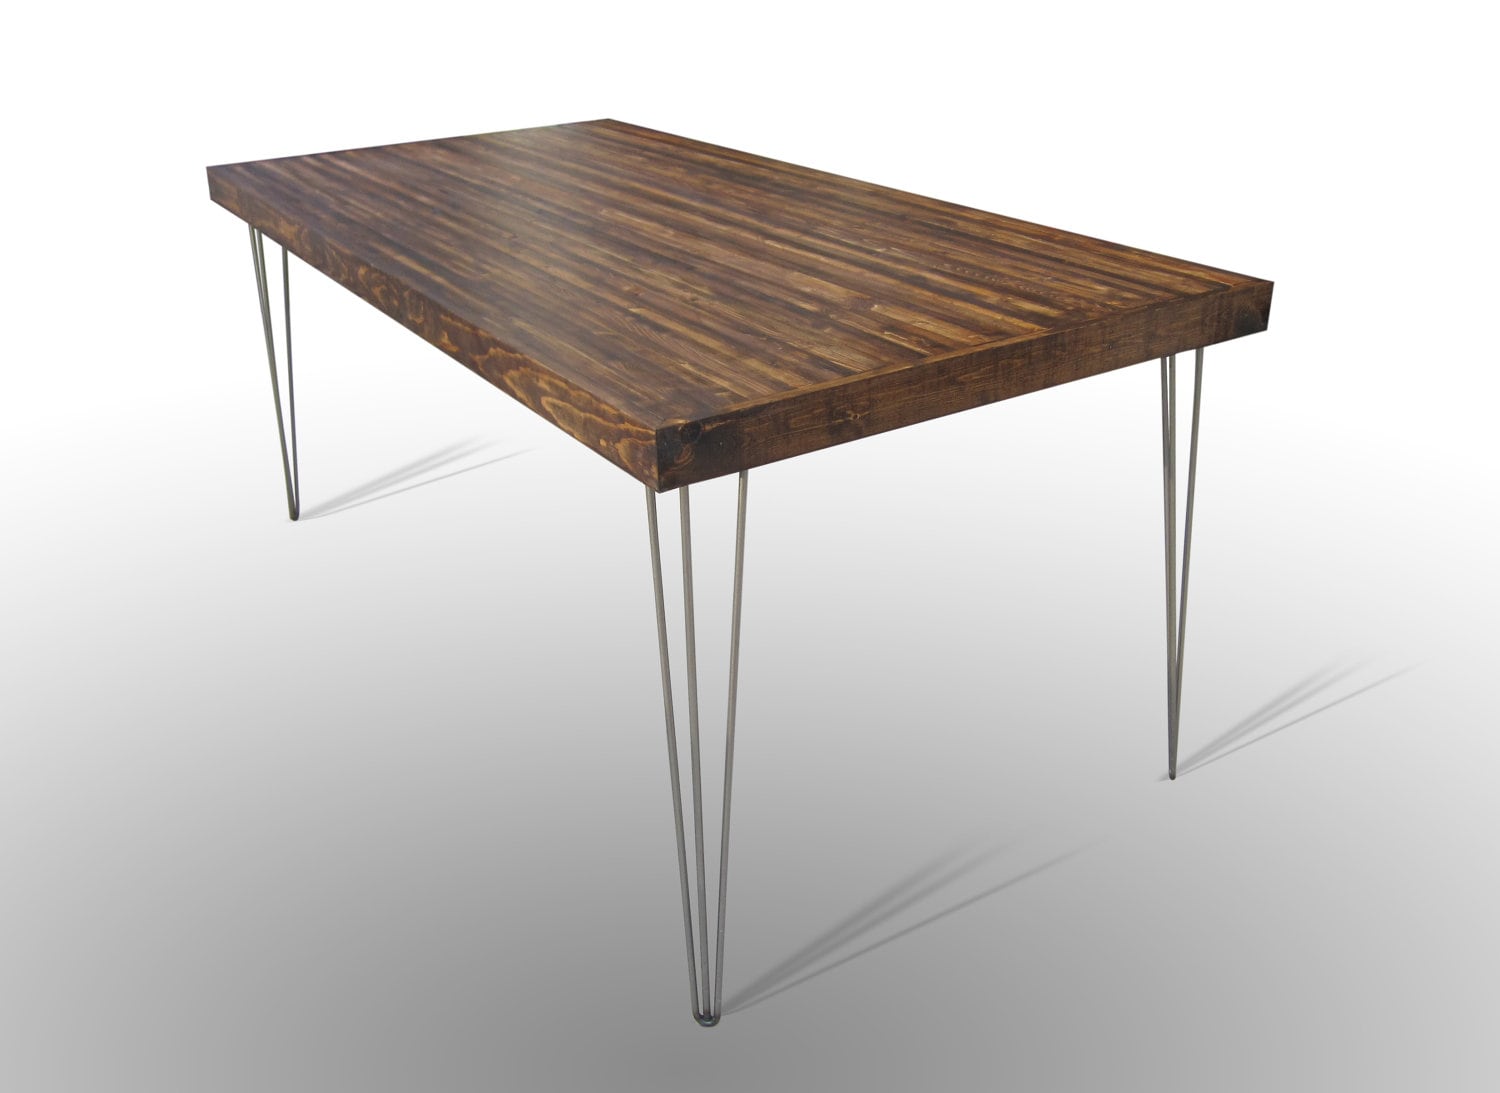 72x36 Dining Table With Hairpin Legs Harvest Dark Ale